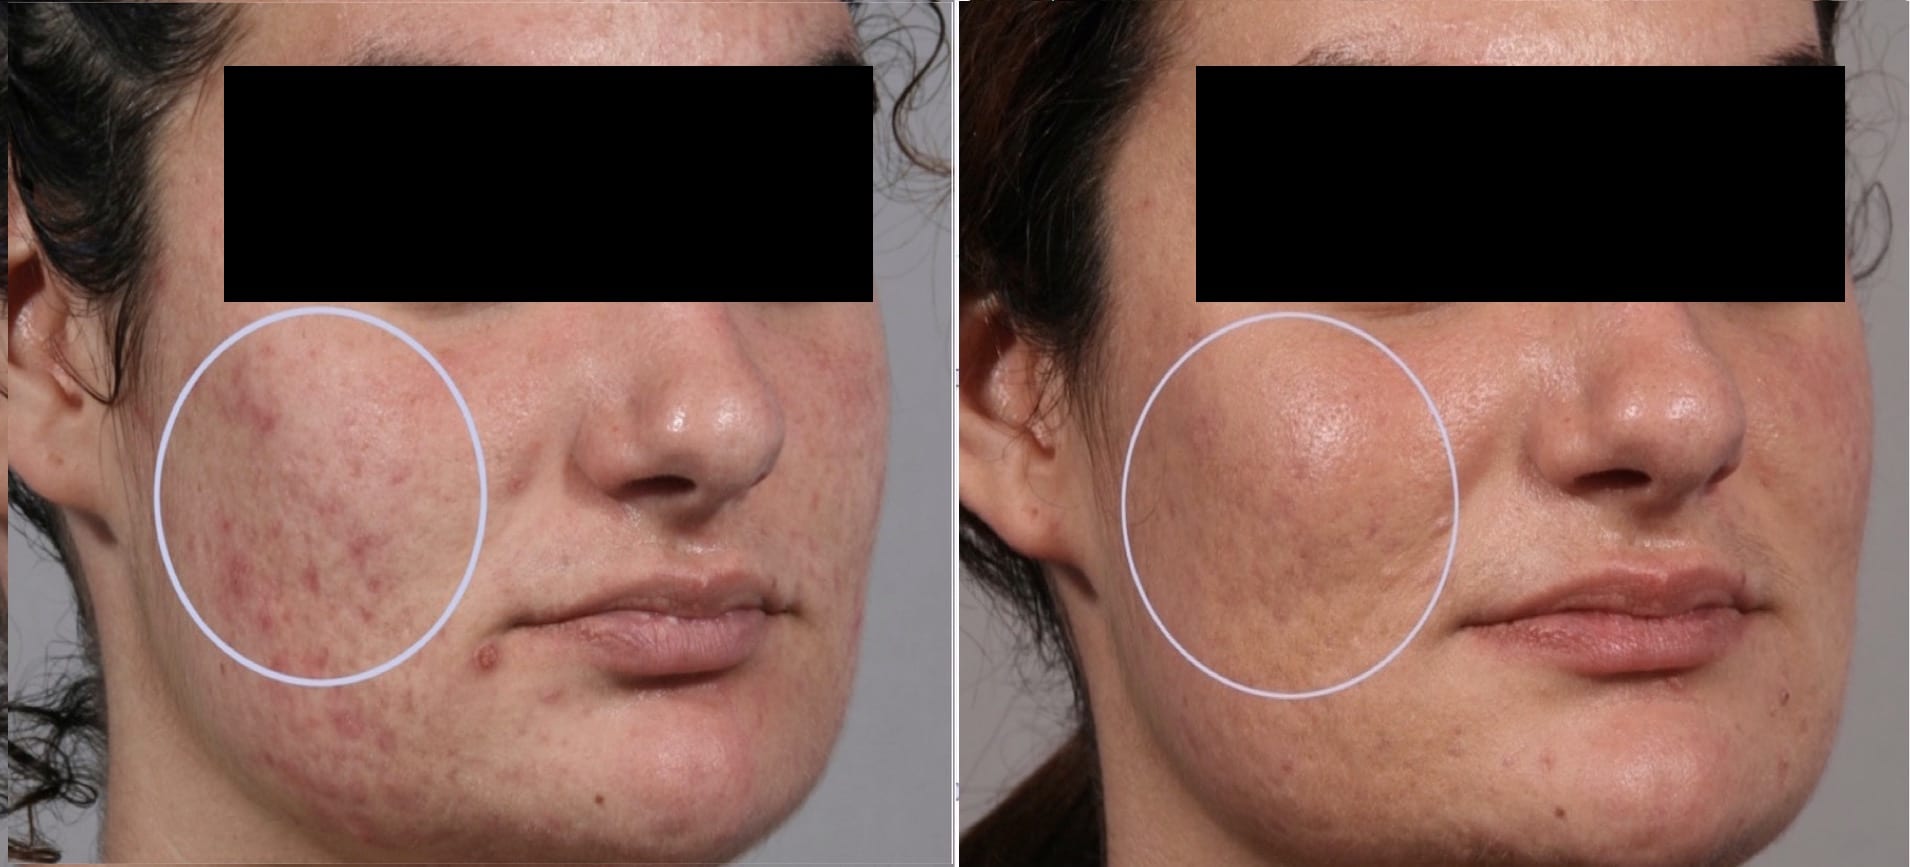 25 year old patient before treatment and 2 weeks after 3 Intensif RF Microneedle treatments for acne scars.